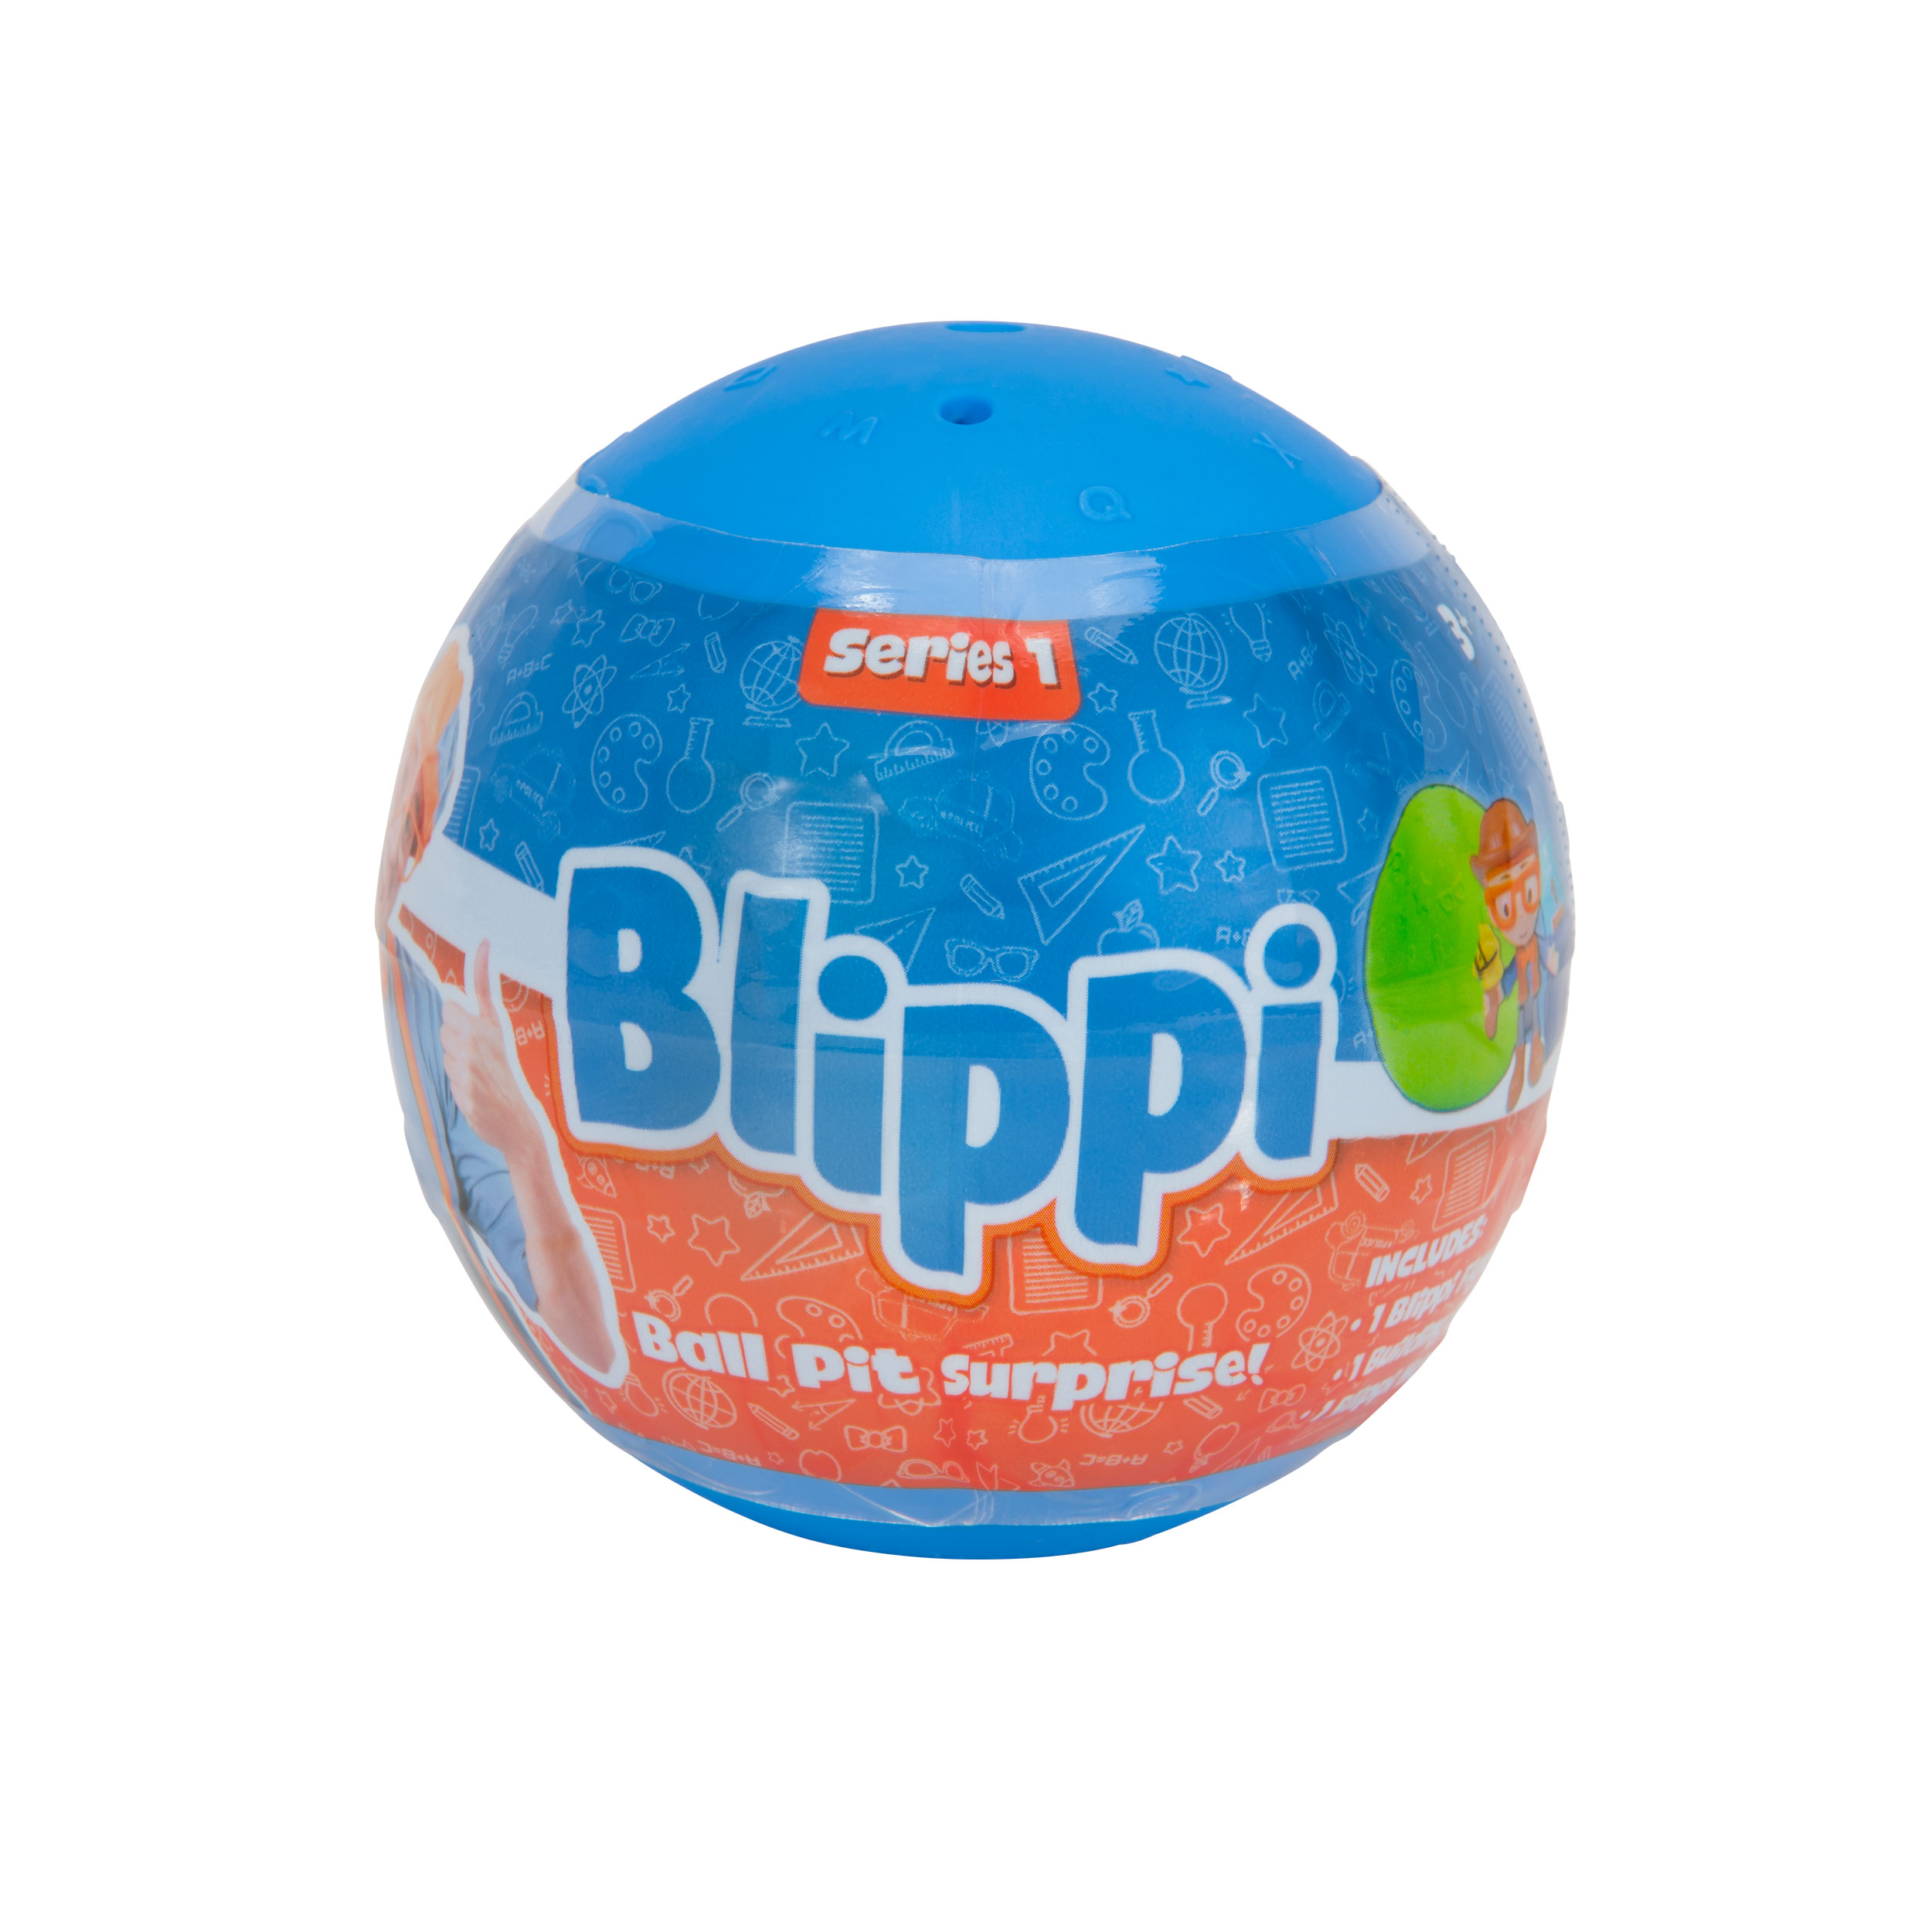 Blippi Ball Pit Surprise - Styles May Vary (In Store Pick Up Only) - image 2 of 3